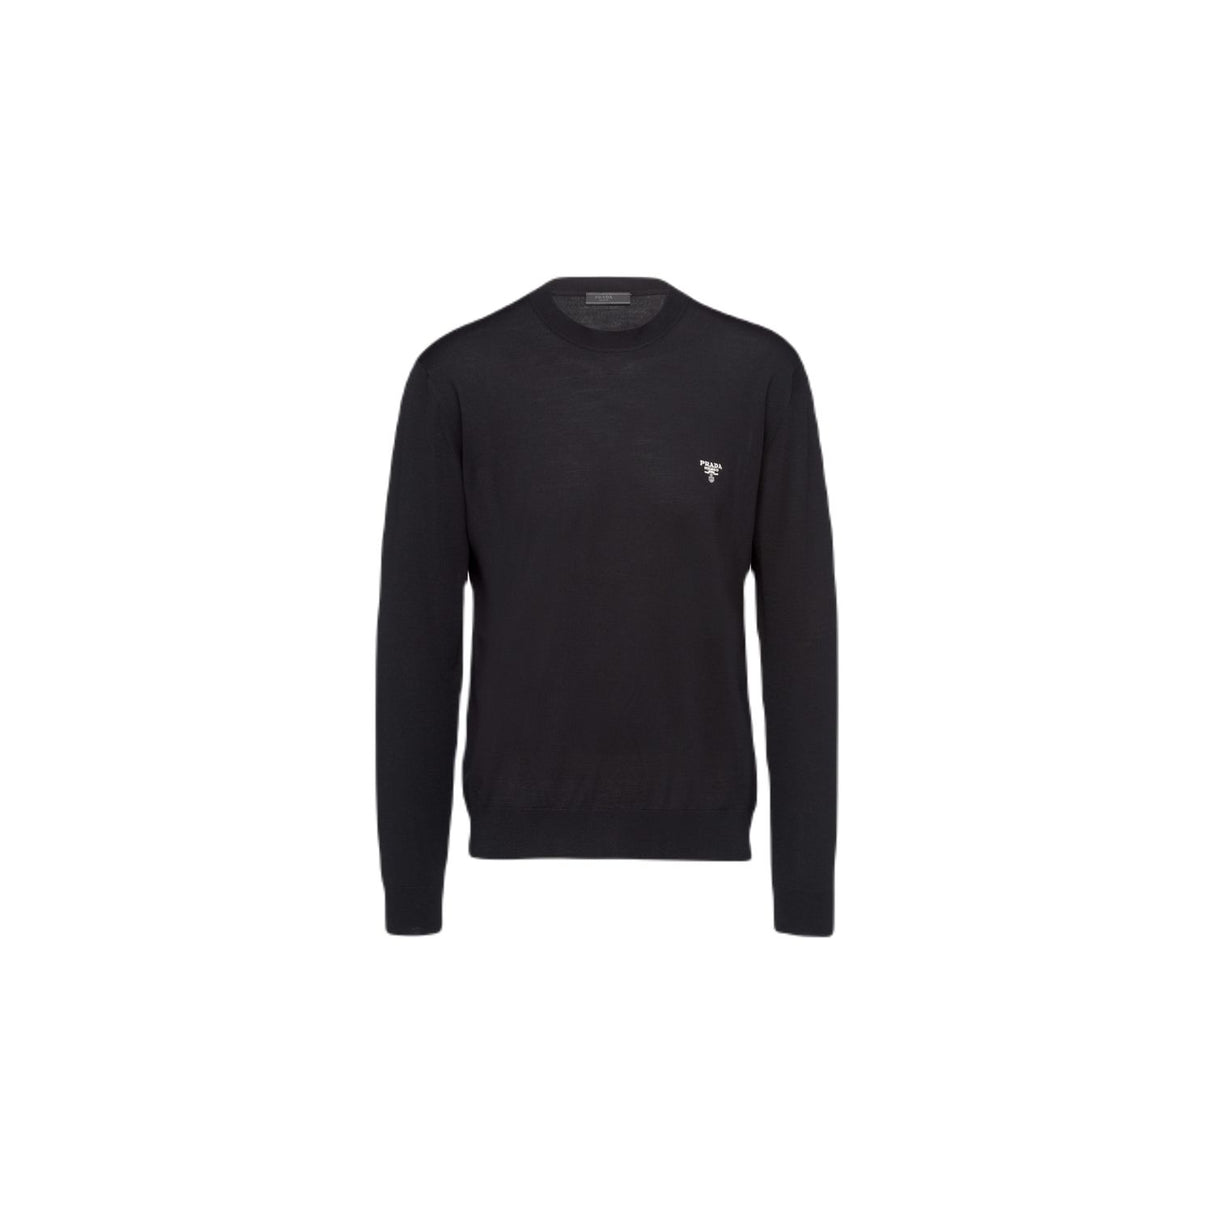 PRADA Black Knit Sweater for Men - FW23 Collection